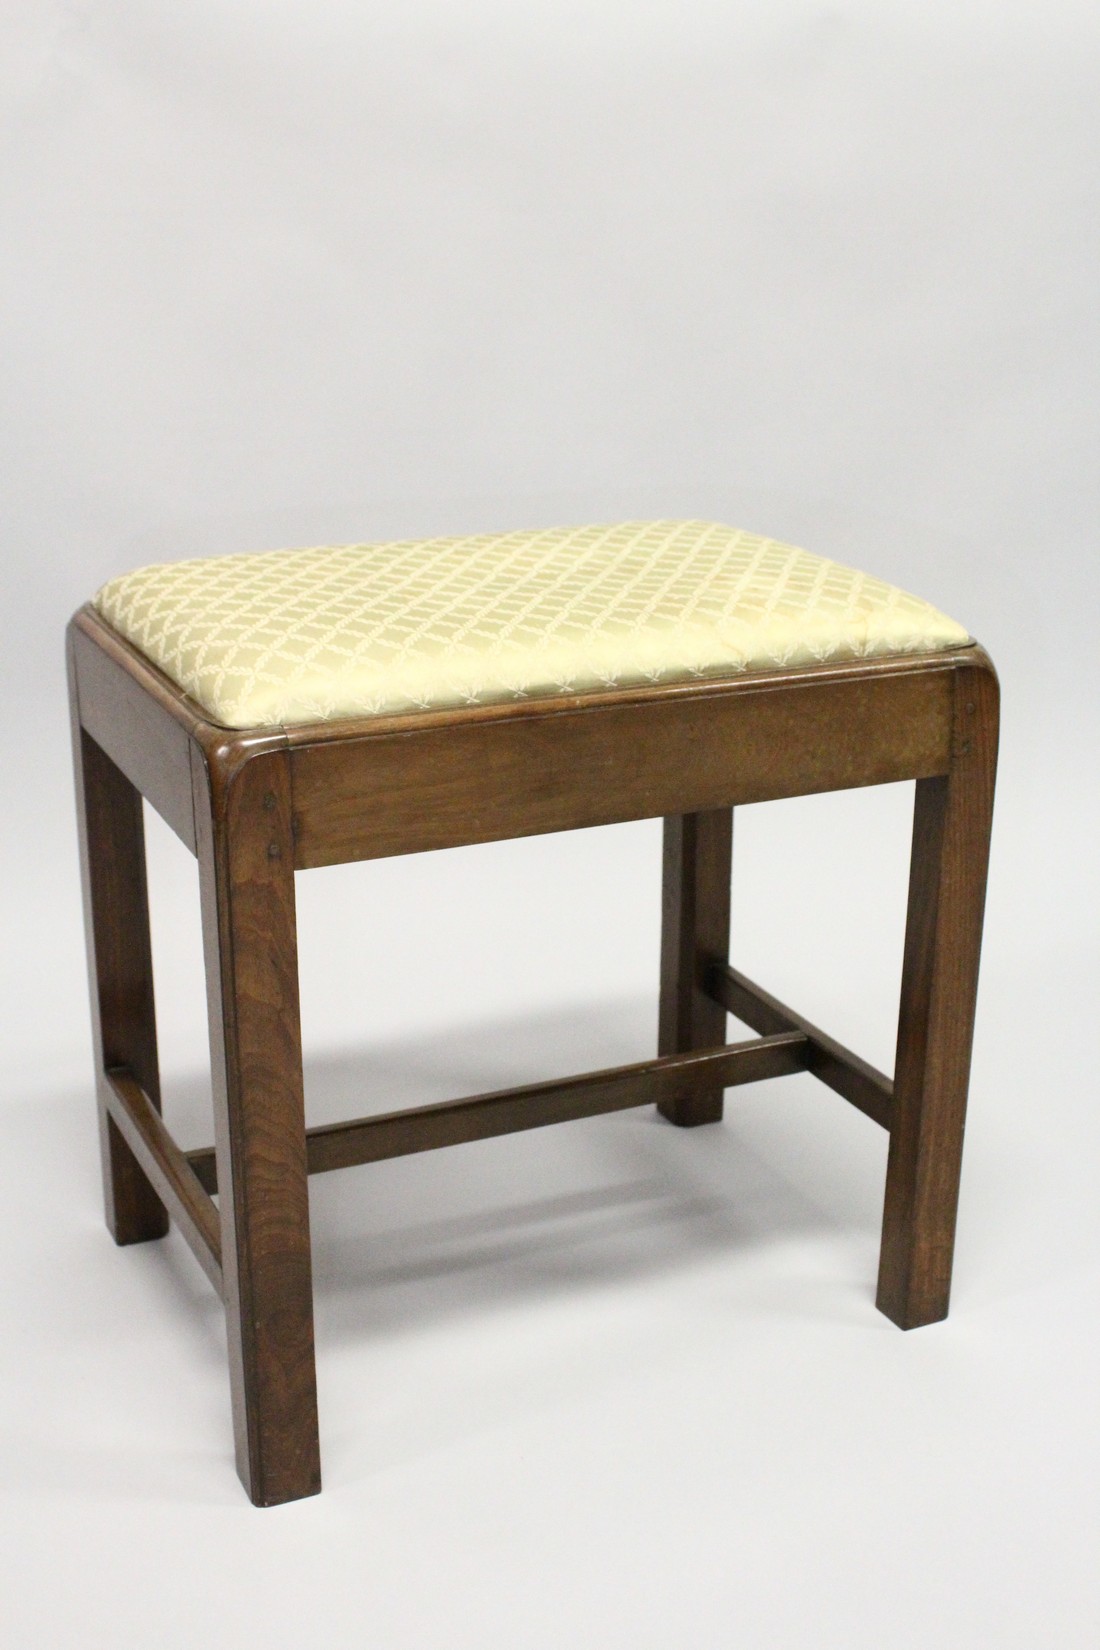 A GEORGE III MAHOGANY RECTANGULAR STOOL, with drop-in seat on moulded square legs united by - Image 5 of 7